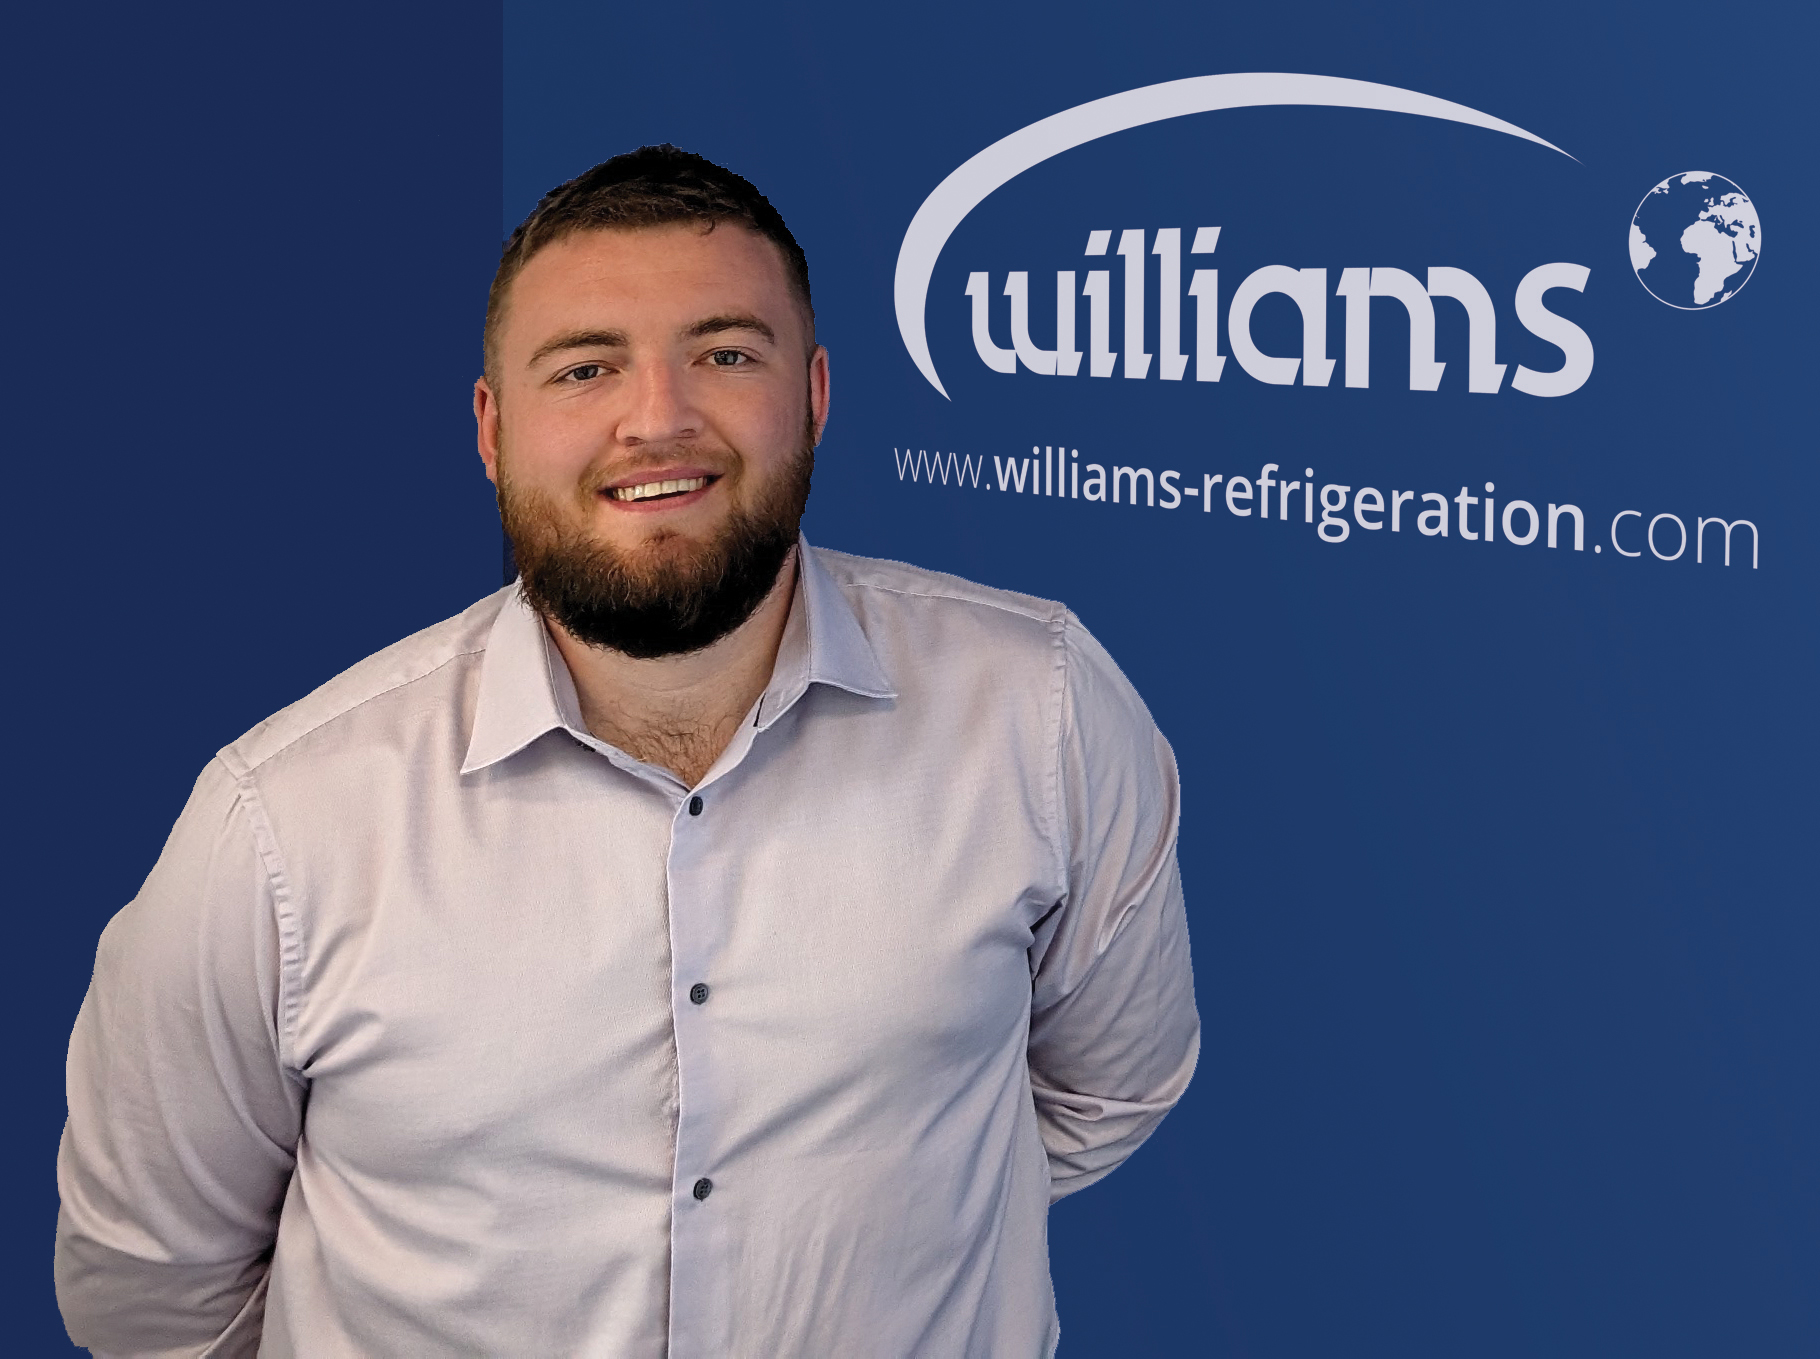 Oliver Brumby is Williams’ new Area Sales Manager